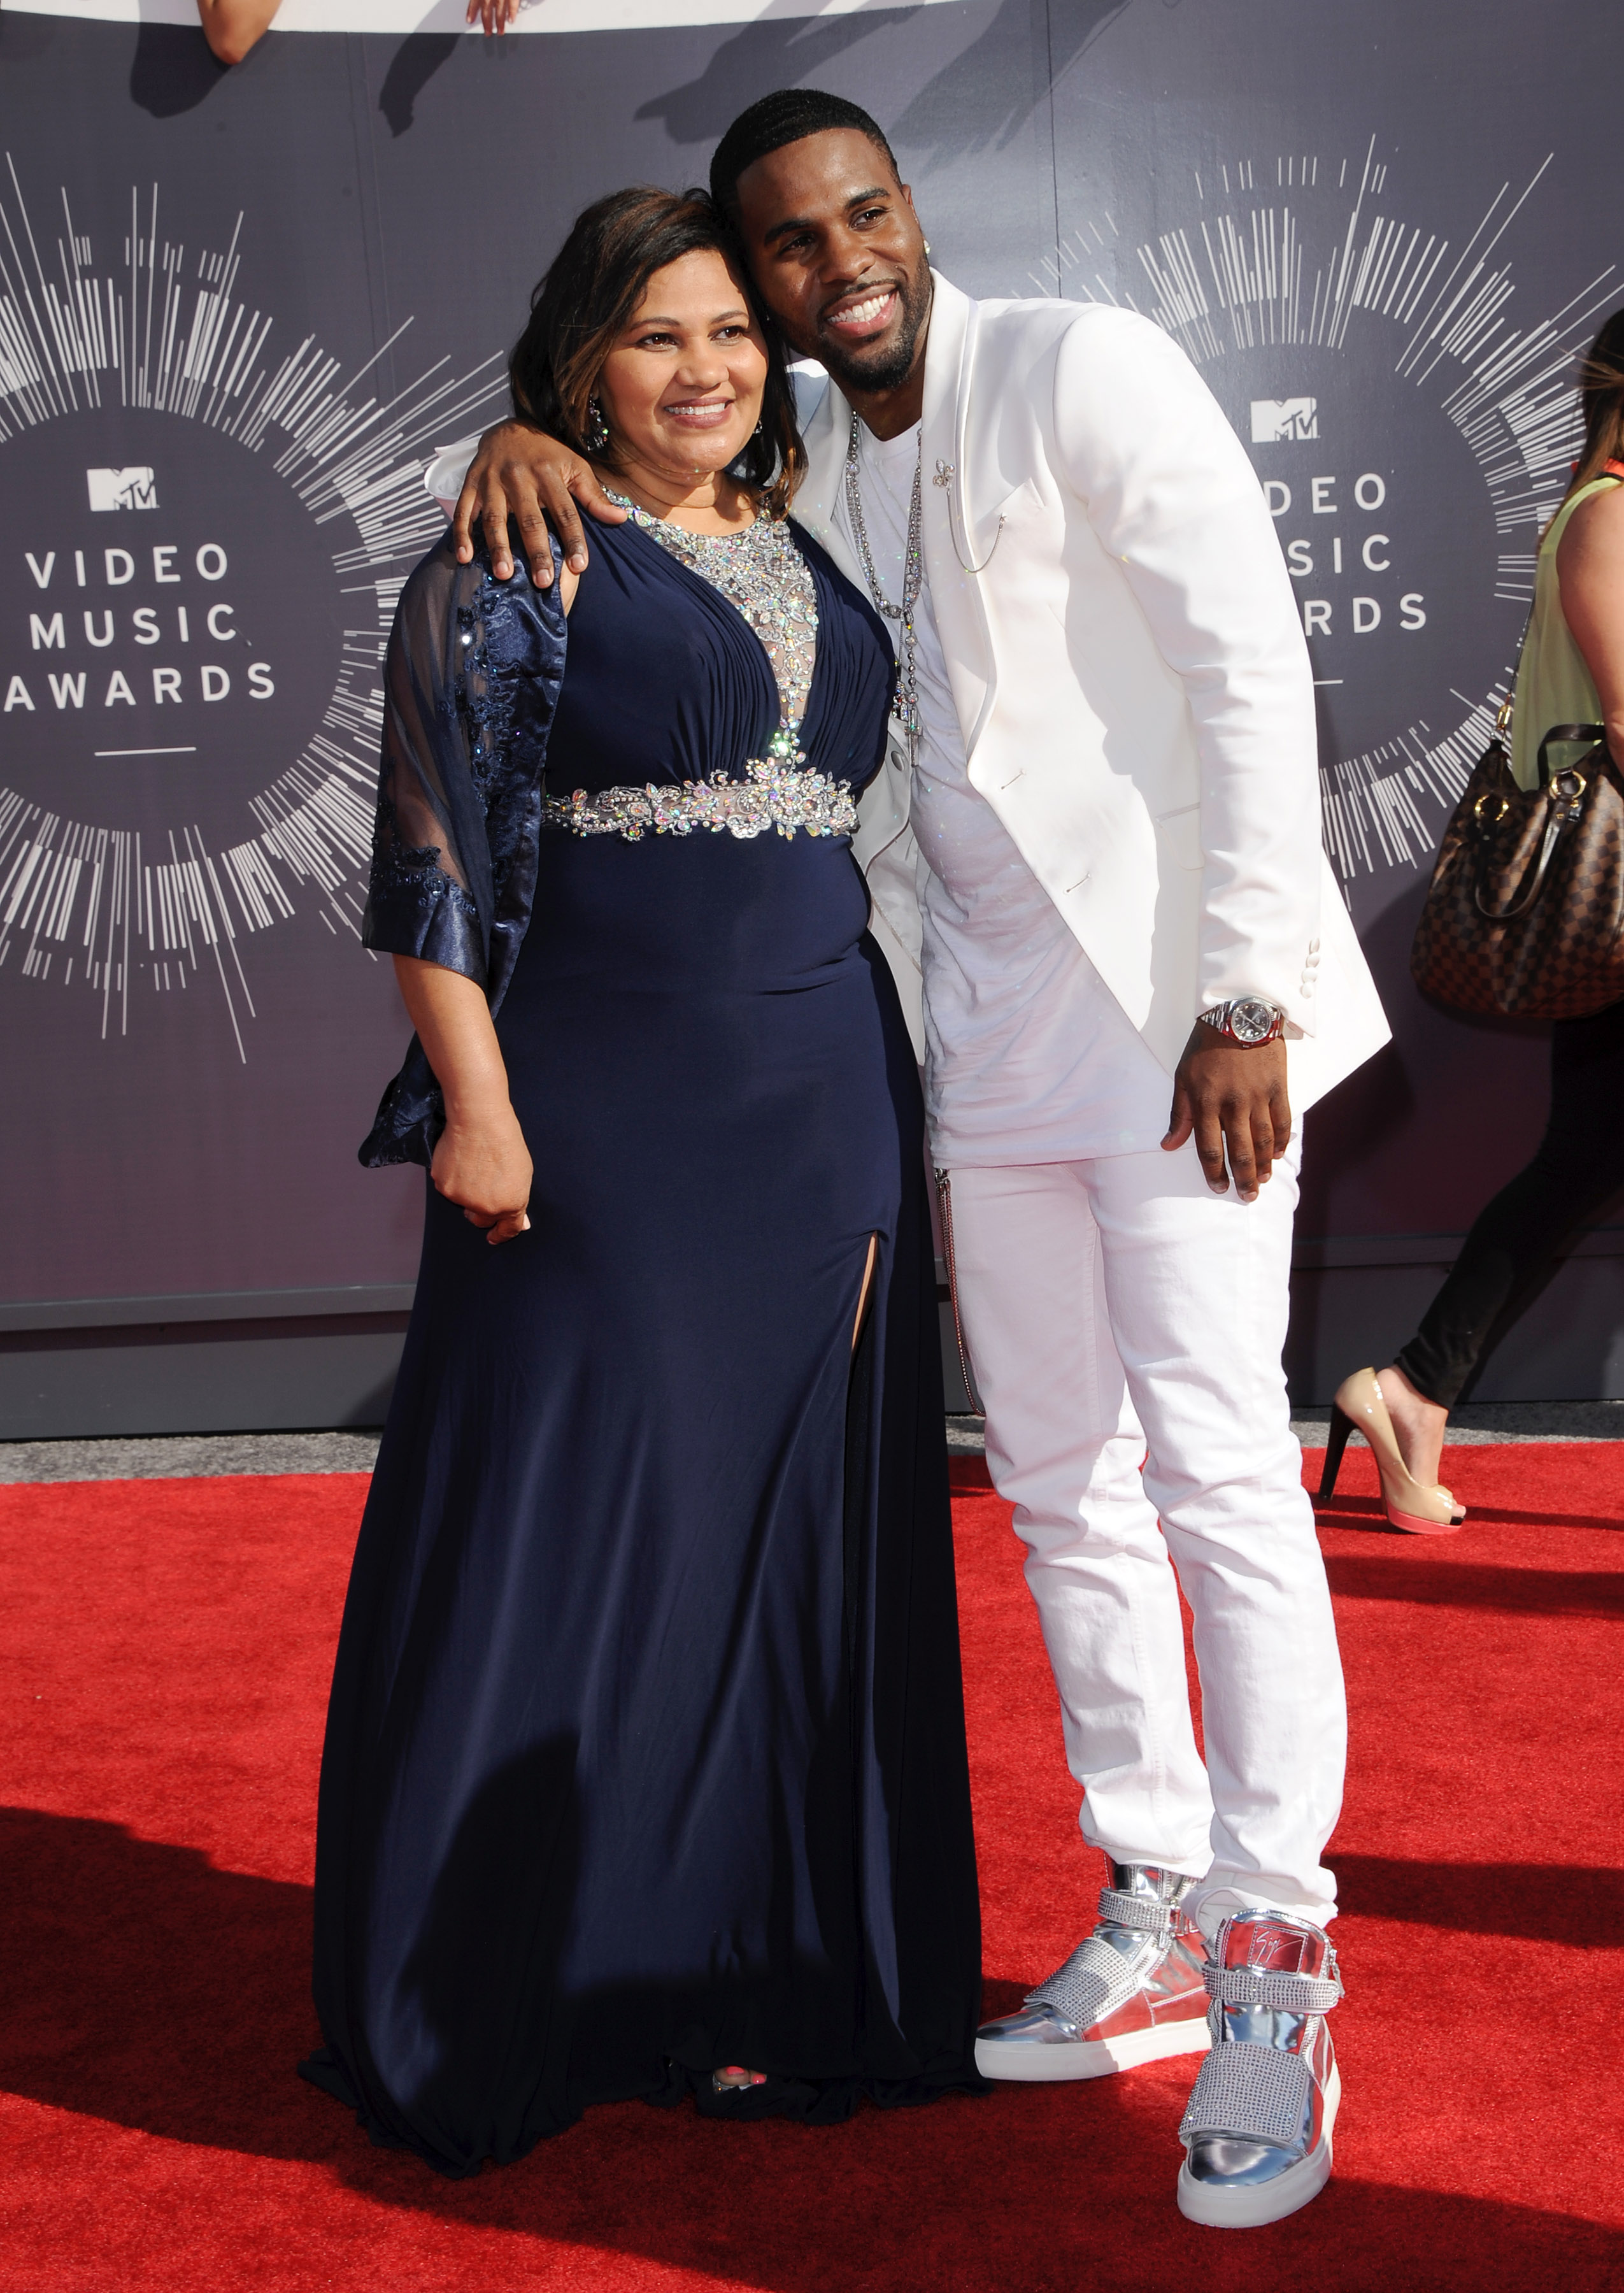 Jason Derulo with his mother, Jochlin Desrouleaux, at the 2014 MTV Video Music Awards on August 24, 2014, in Inglewood, California. | Source: Getty Images